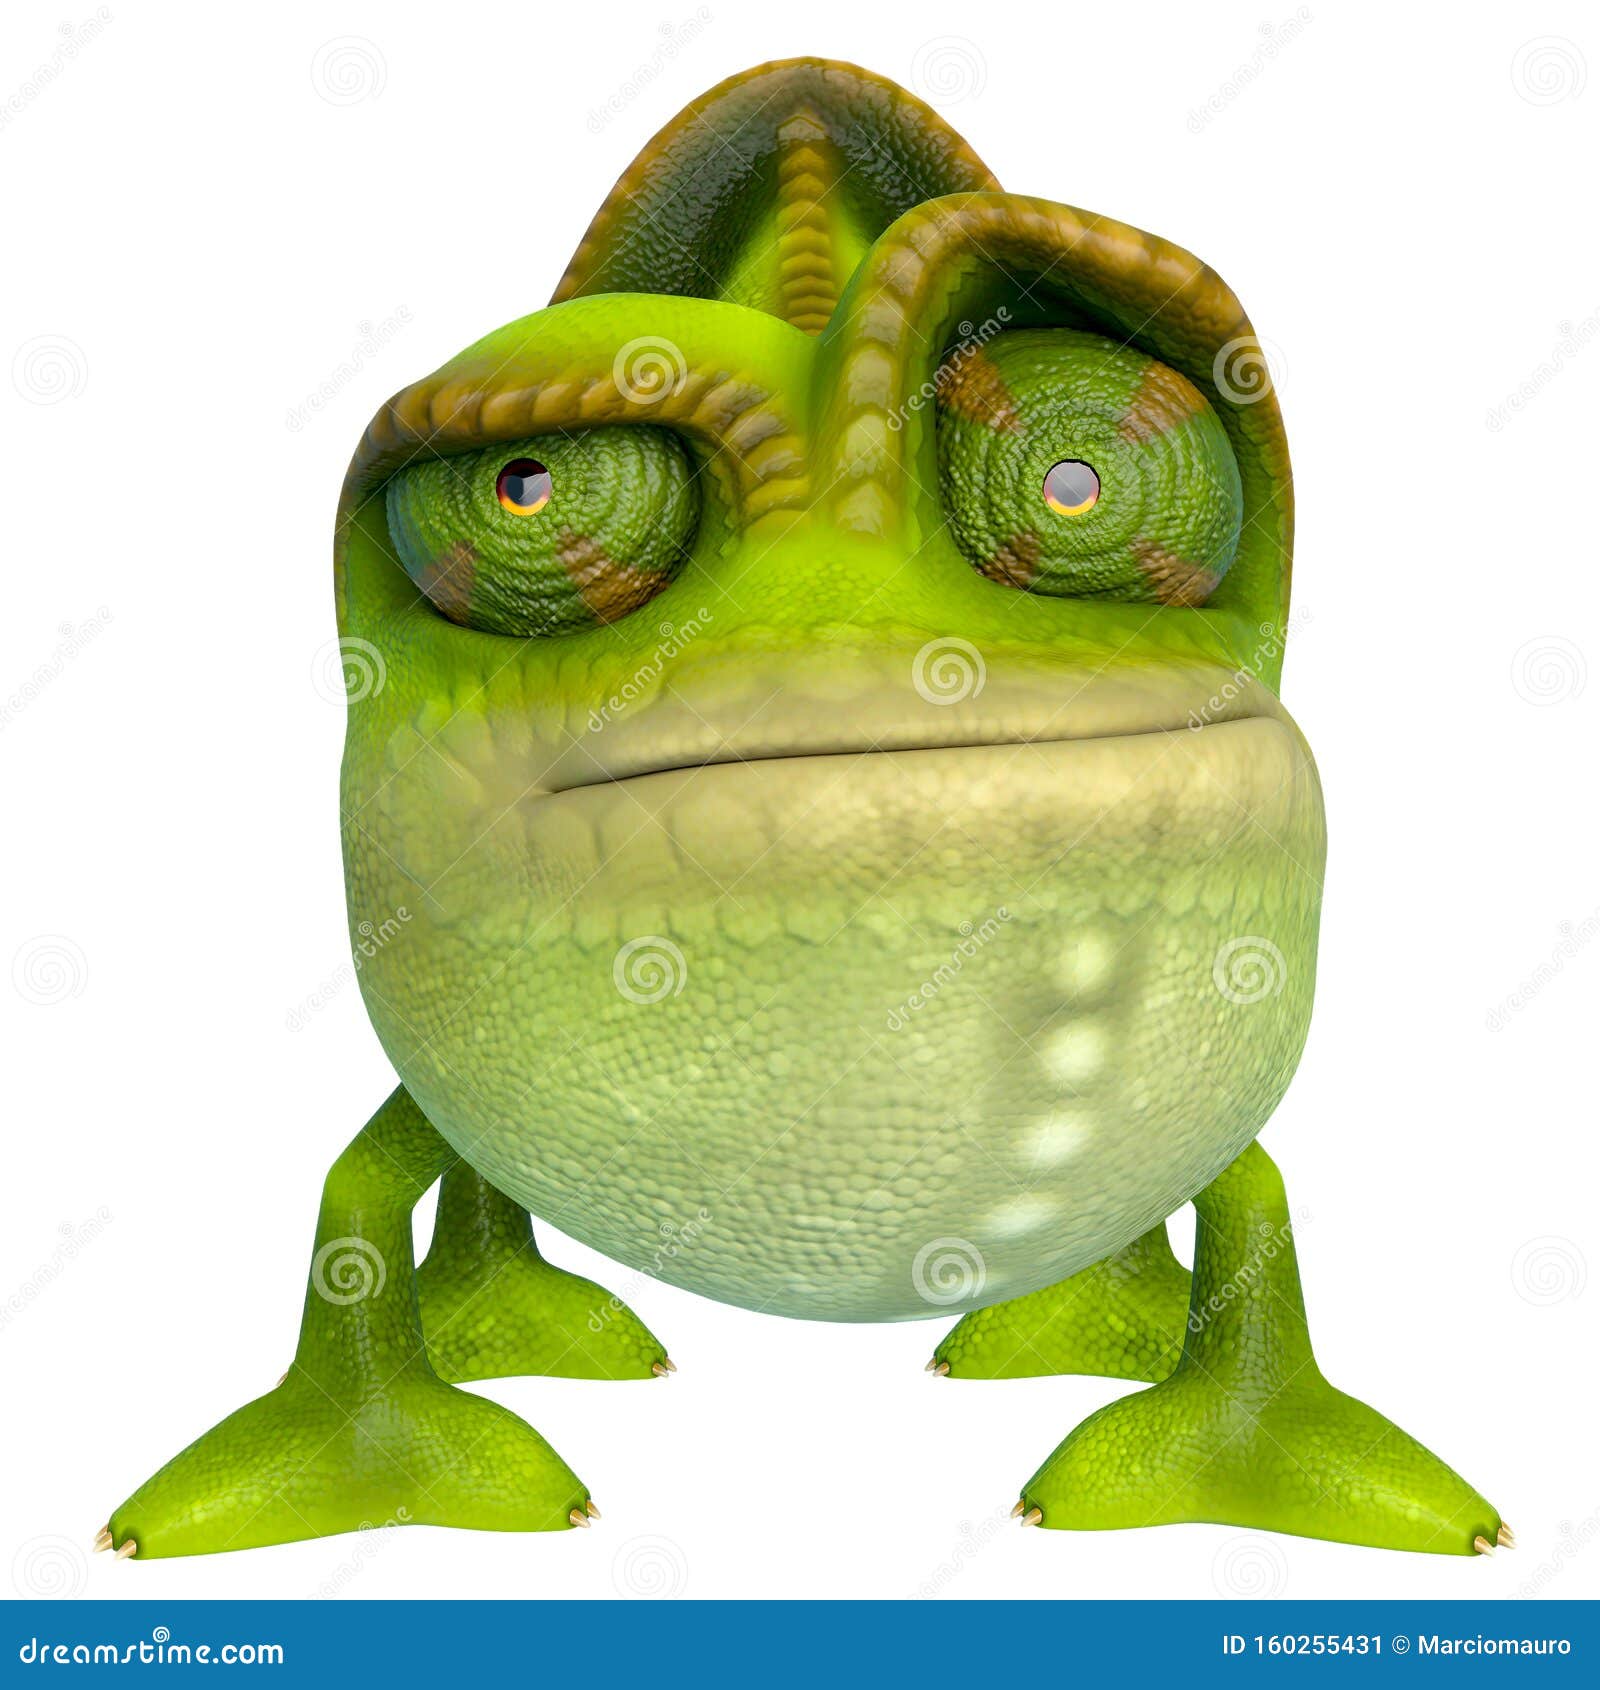 chameleon cartoon have a dubious face in a white background